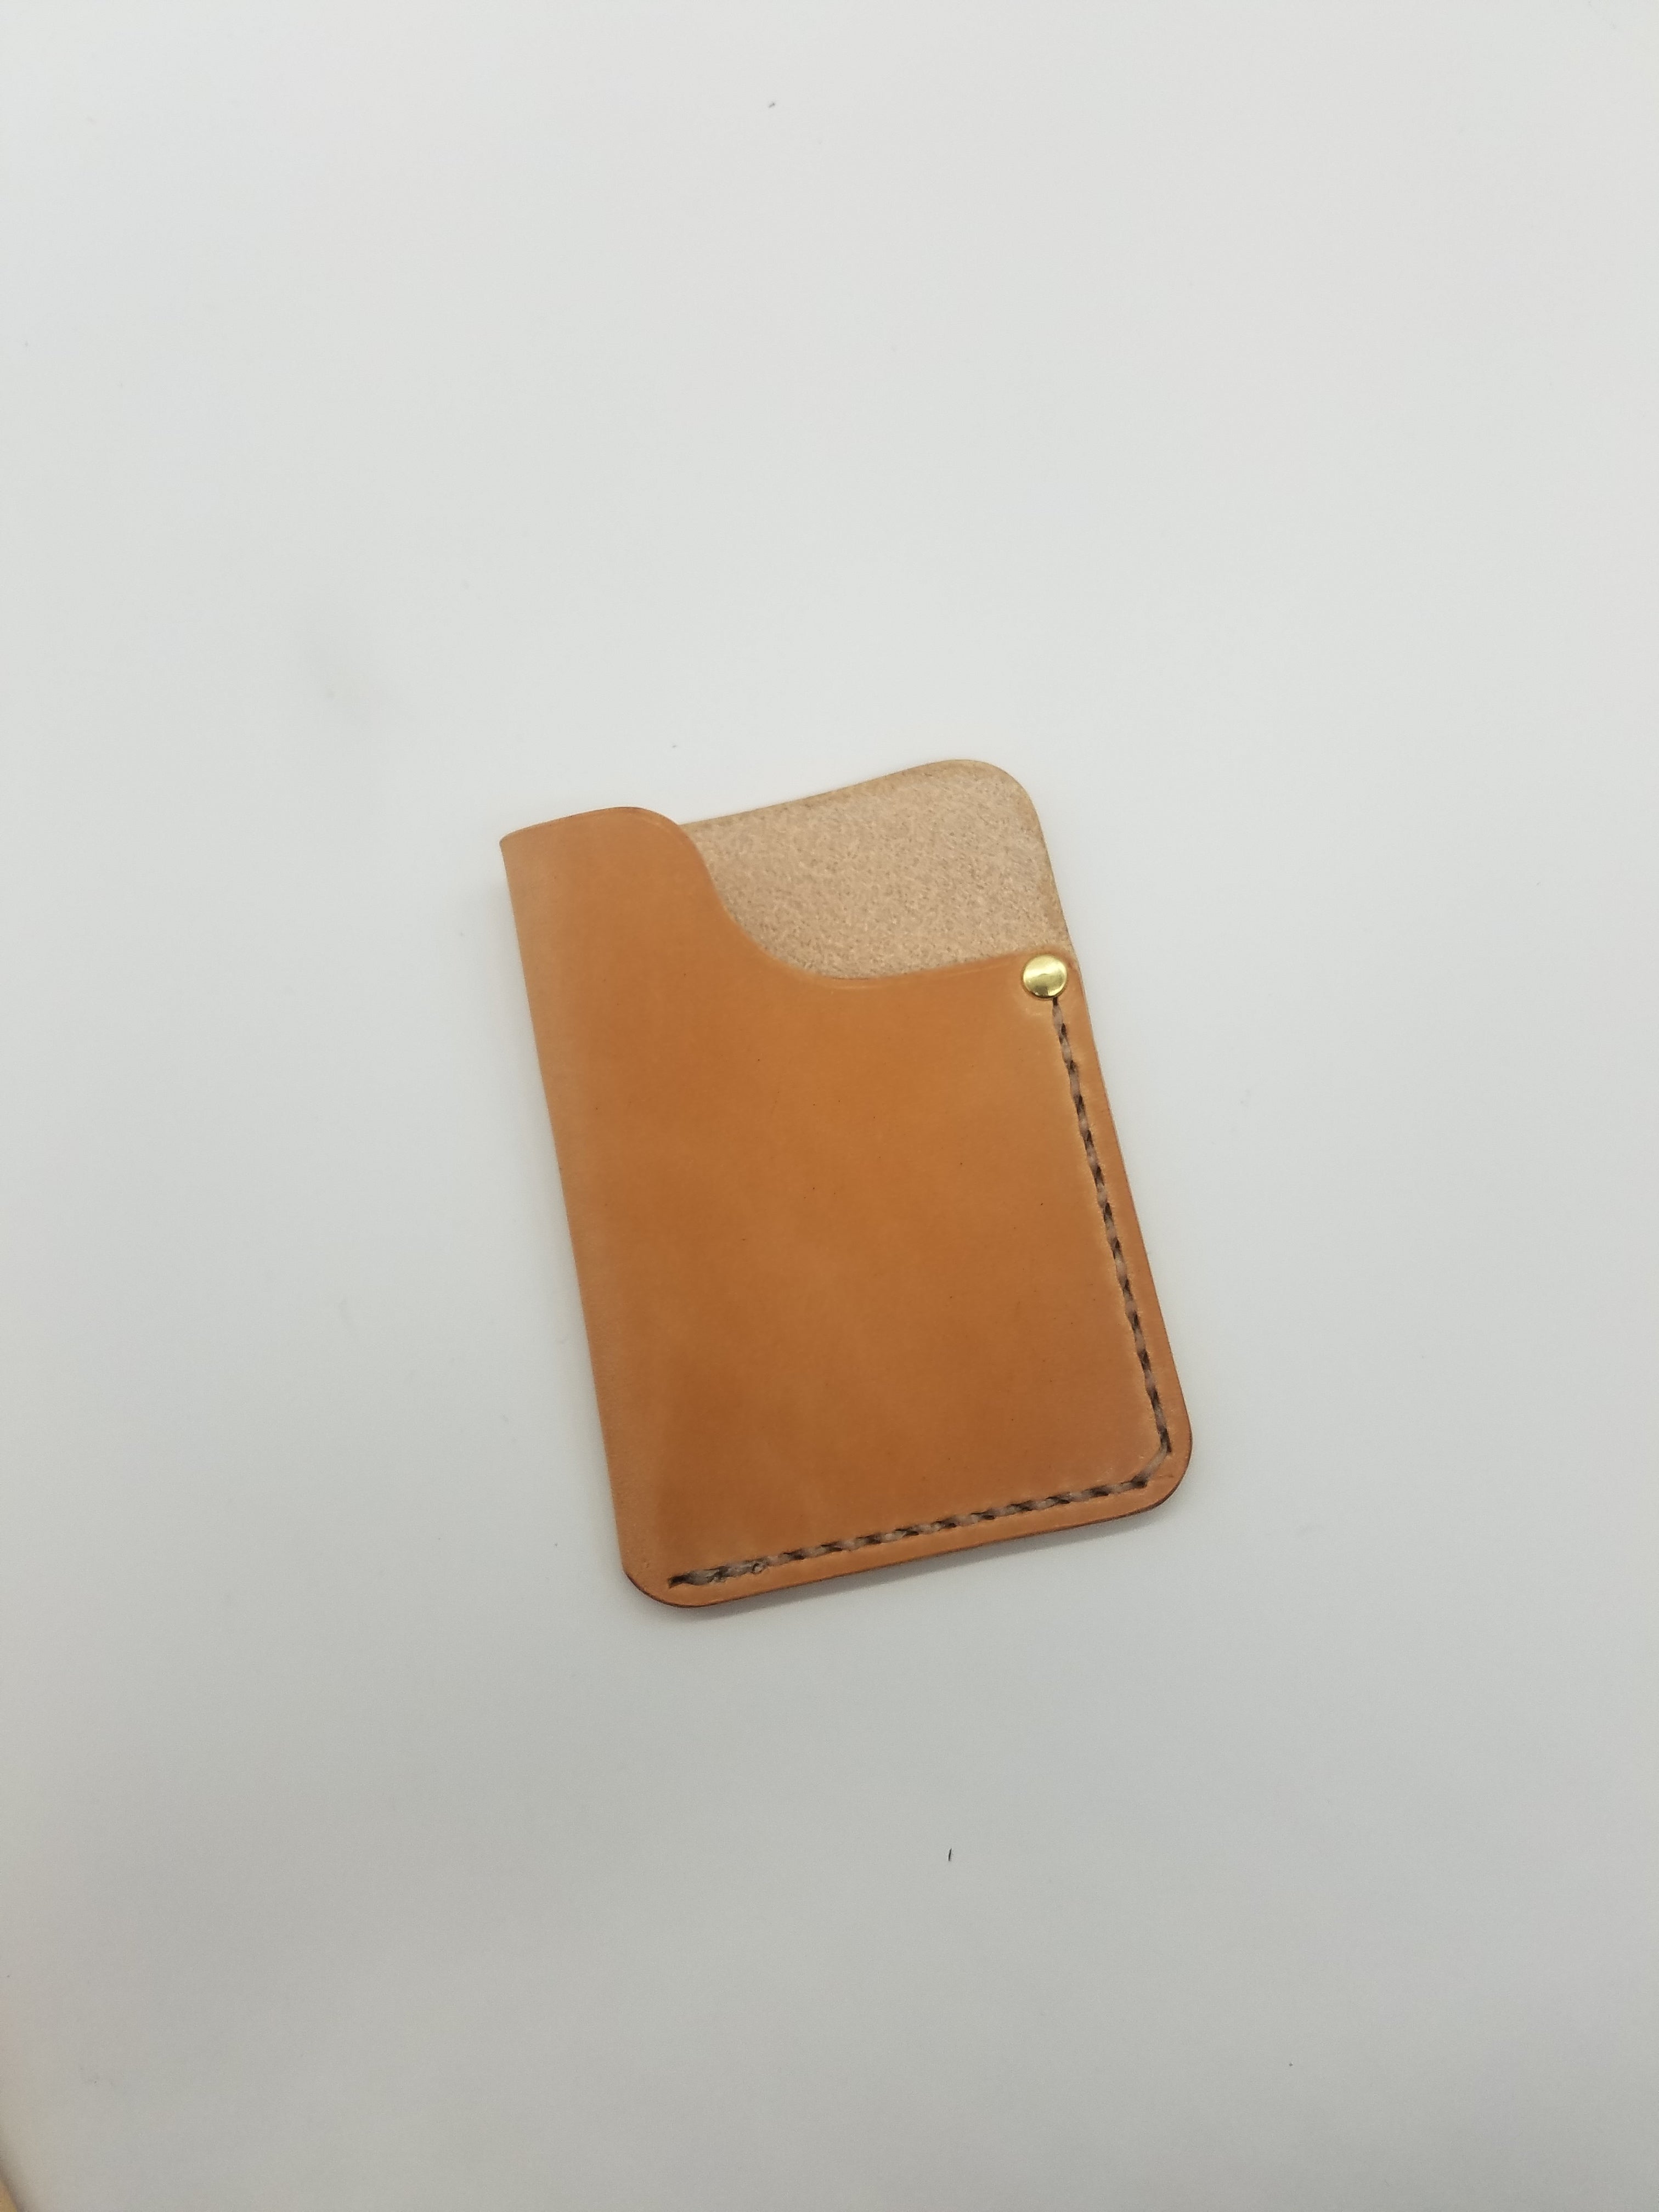 Tannery South Leather Co. Small Key Clip Havana Brown Chromexcel